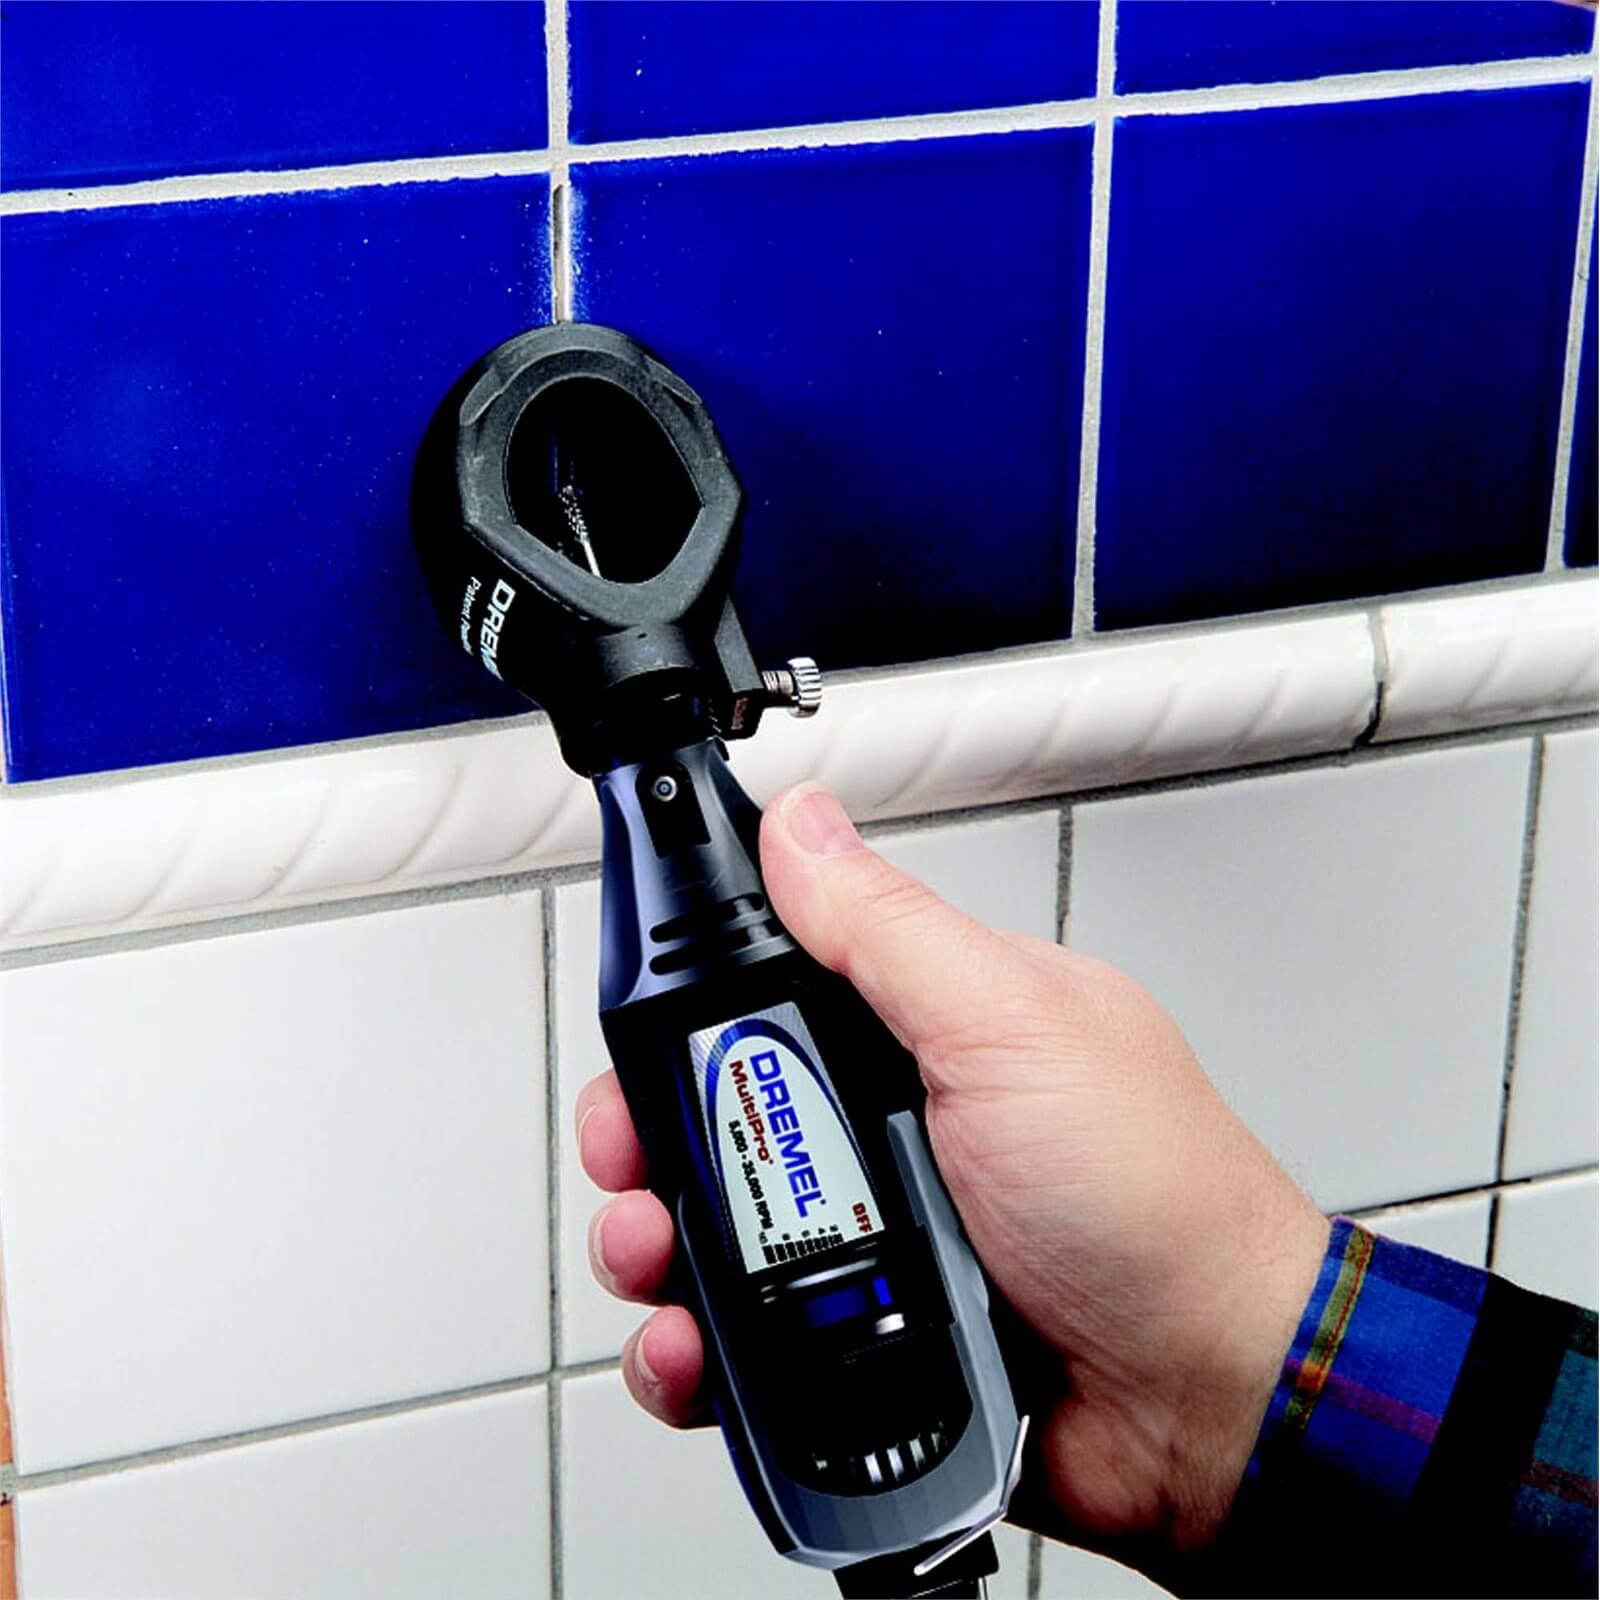 Dremel Grout Remover 569